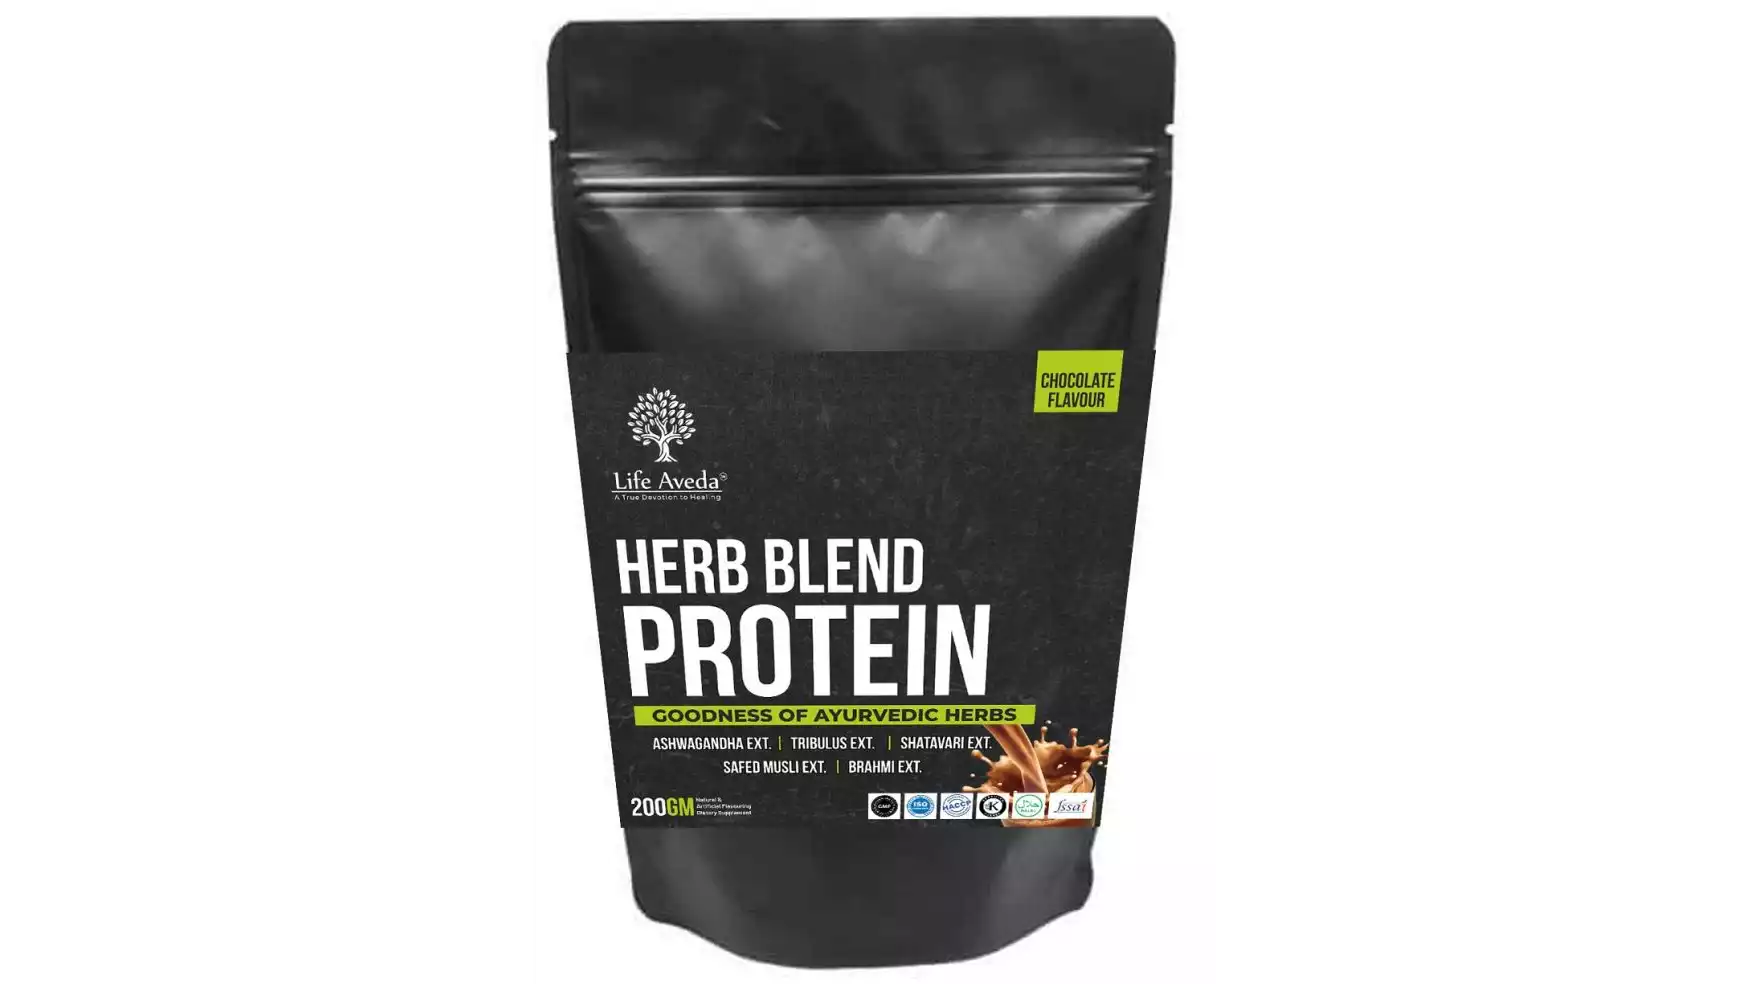 Life Aveda Herb Blend Protein Chocolate (200g)